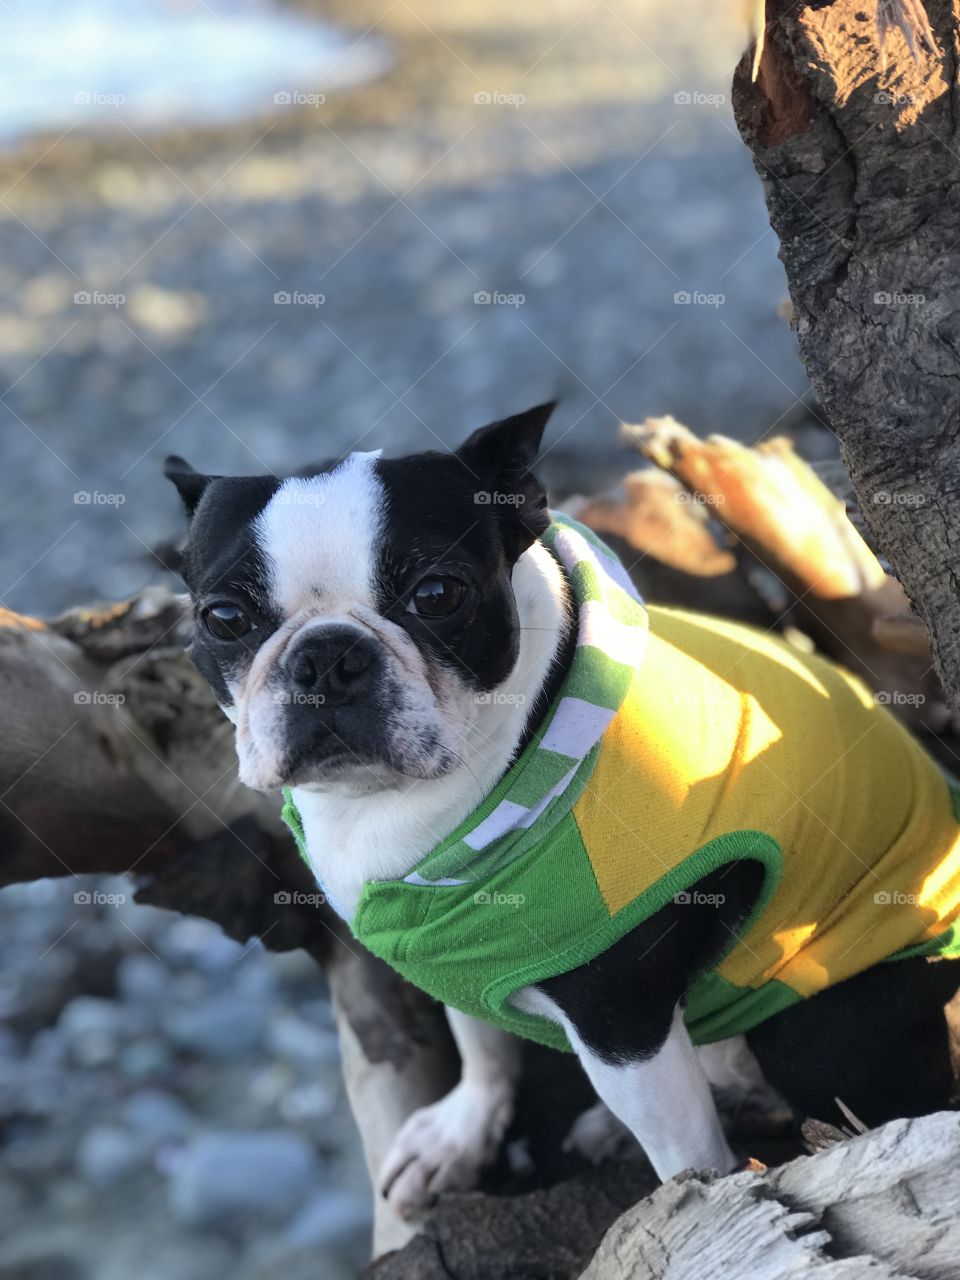 Another day at the beach with pups but this time some beautiful late afternoon winter sun warmed us while we took in the views. My wussy Boston Terriers hate getting cold so they had their shirts on when clambering around on the driftwood. 